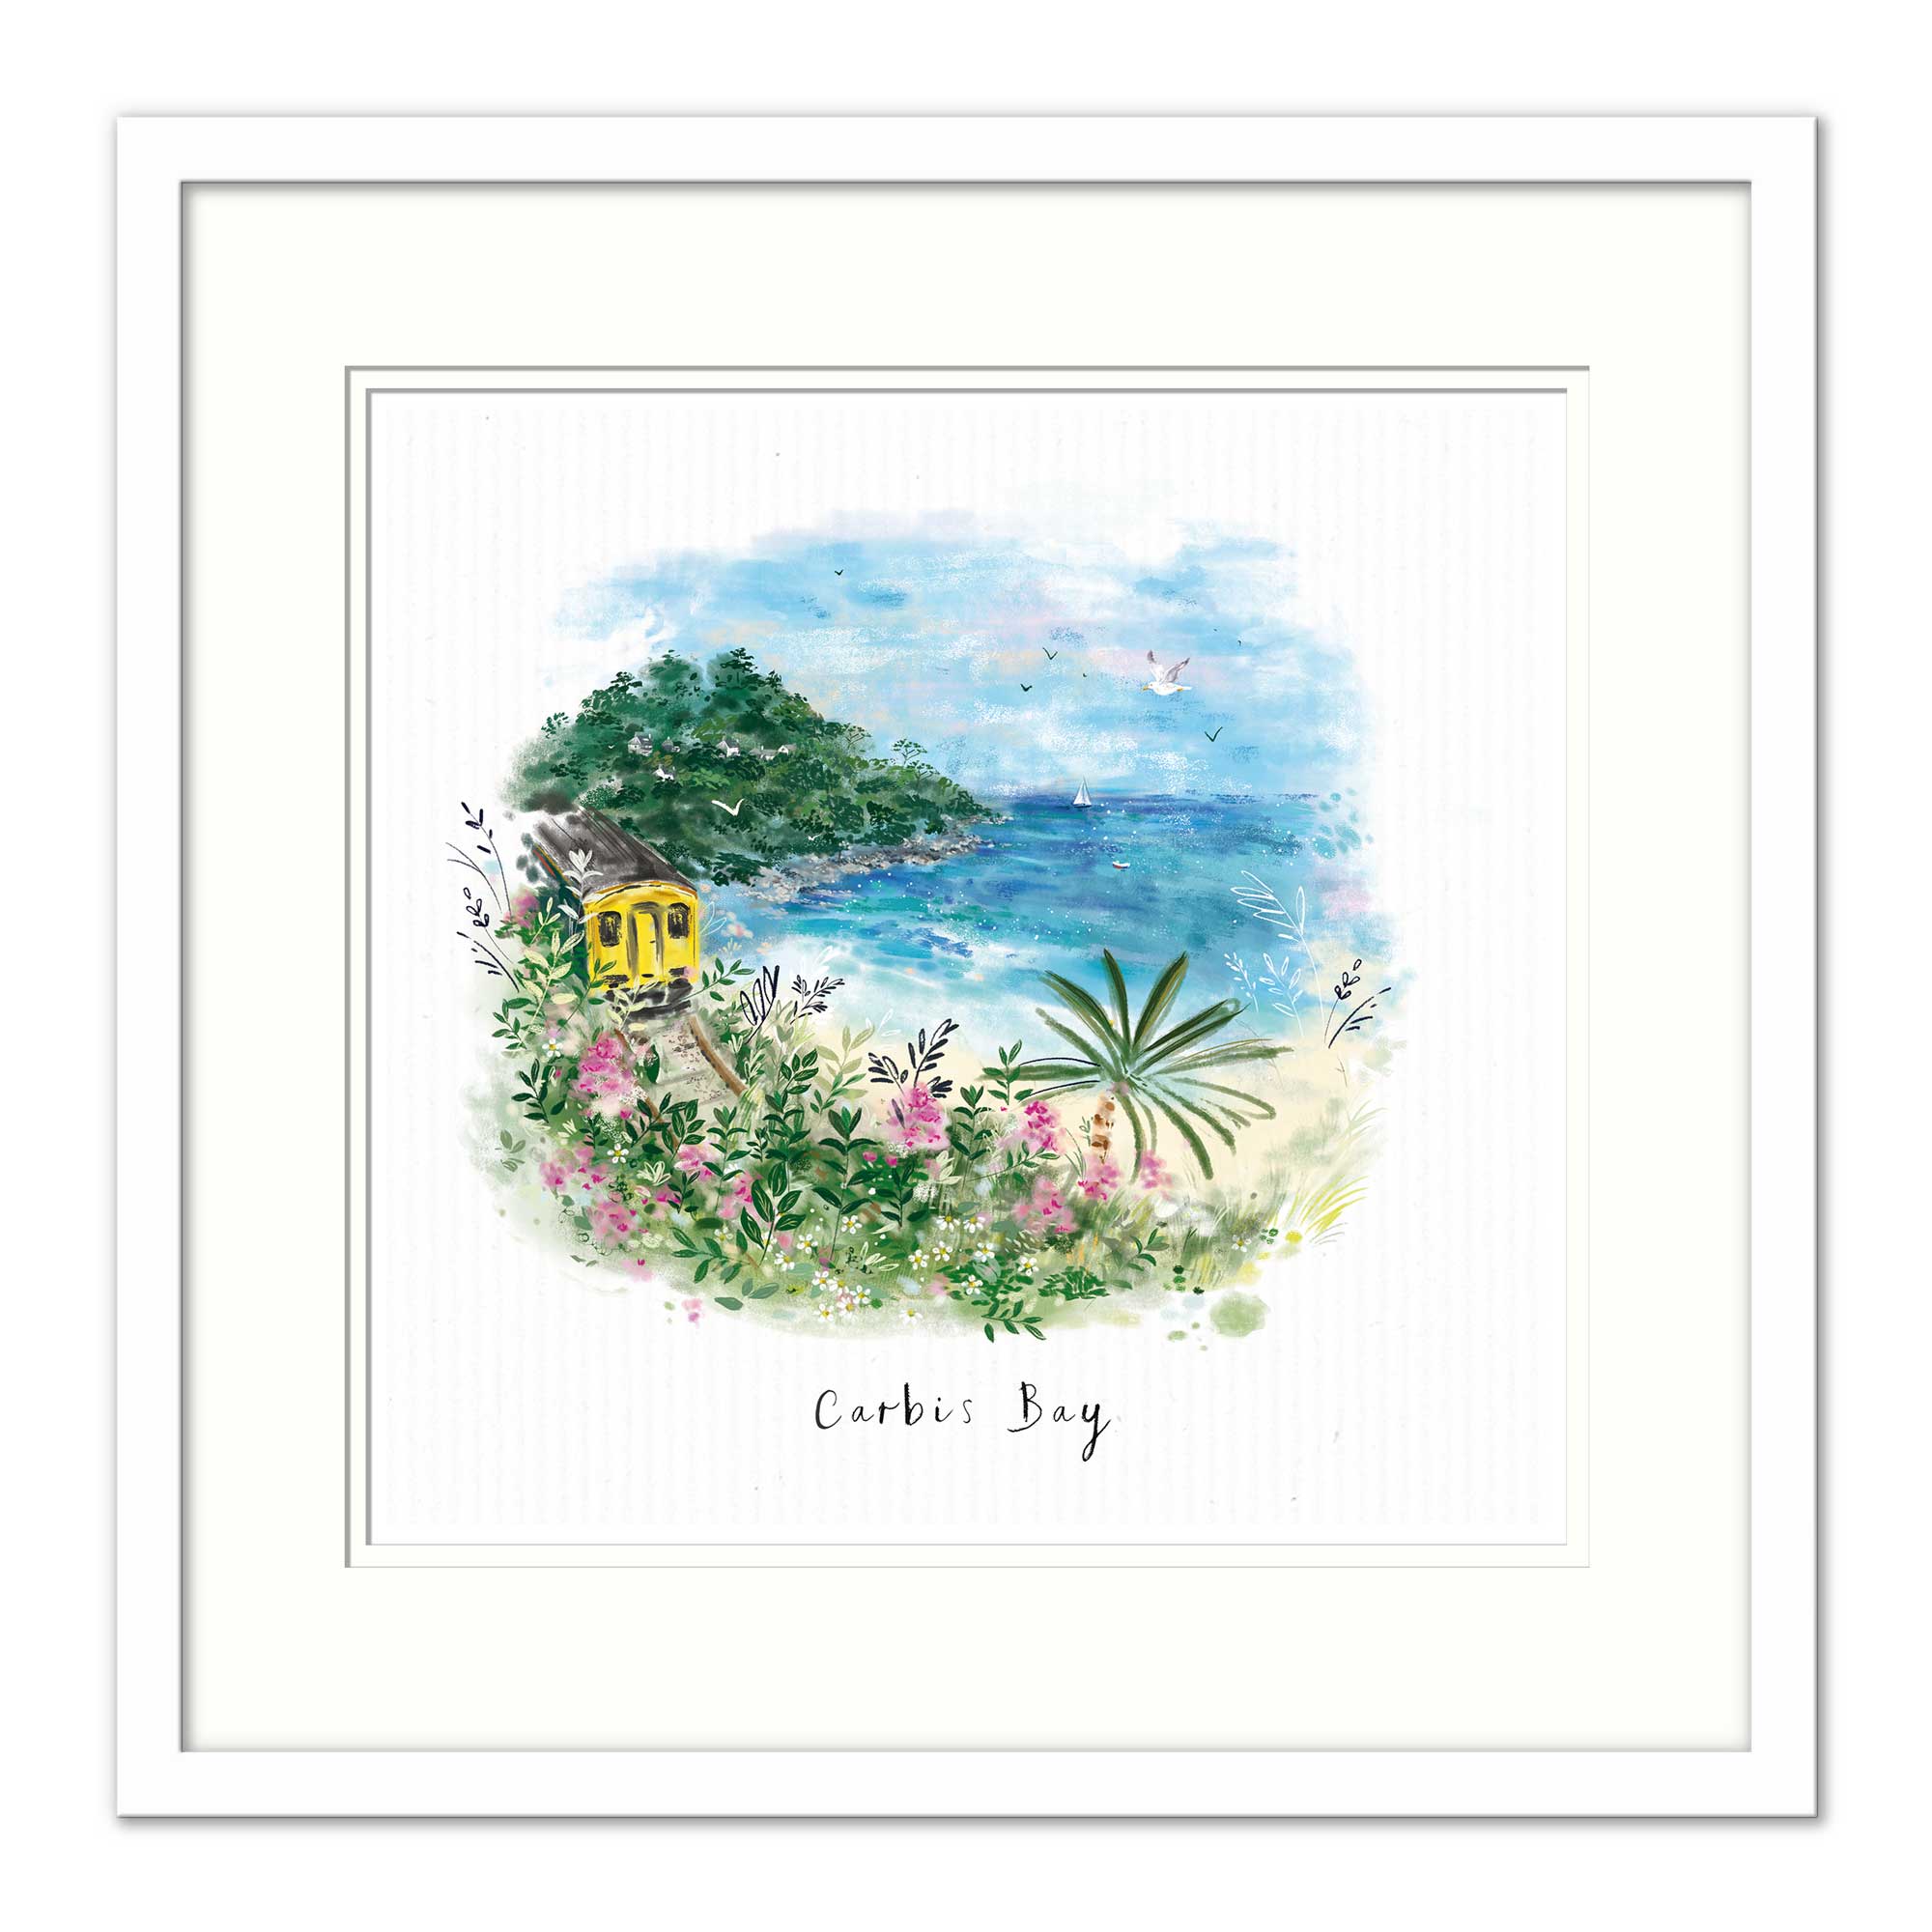 Carbis Bay Dream View Small Framed Print